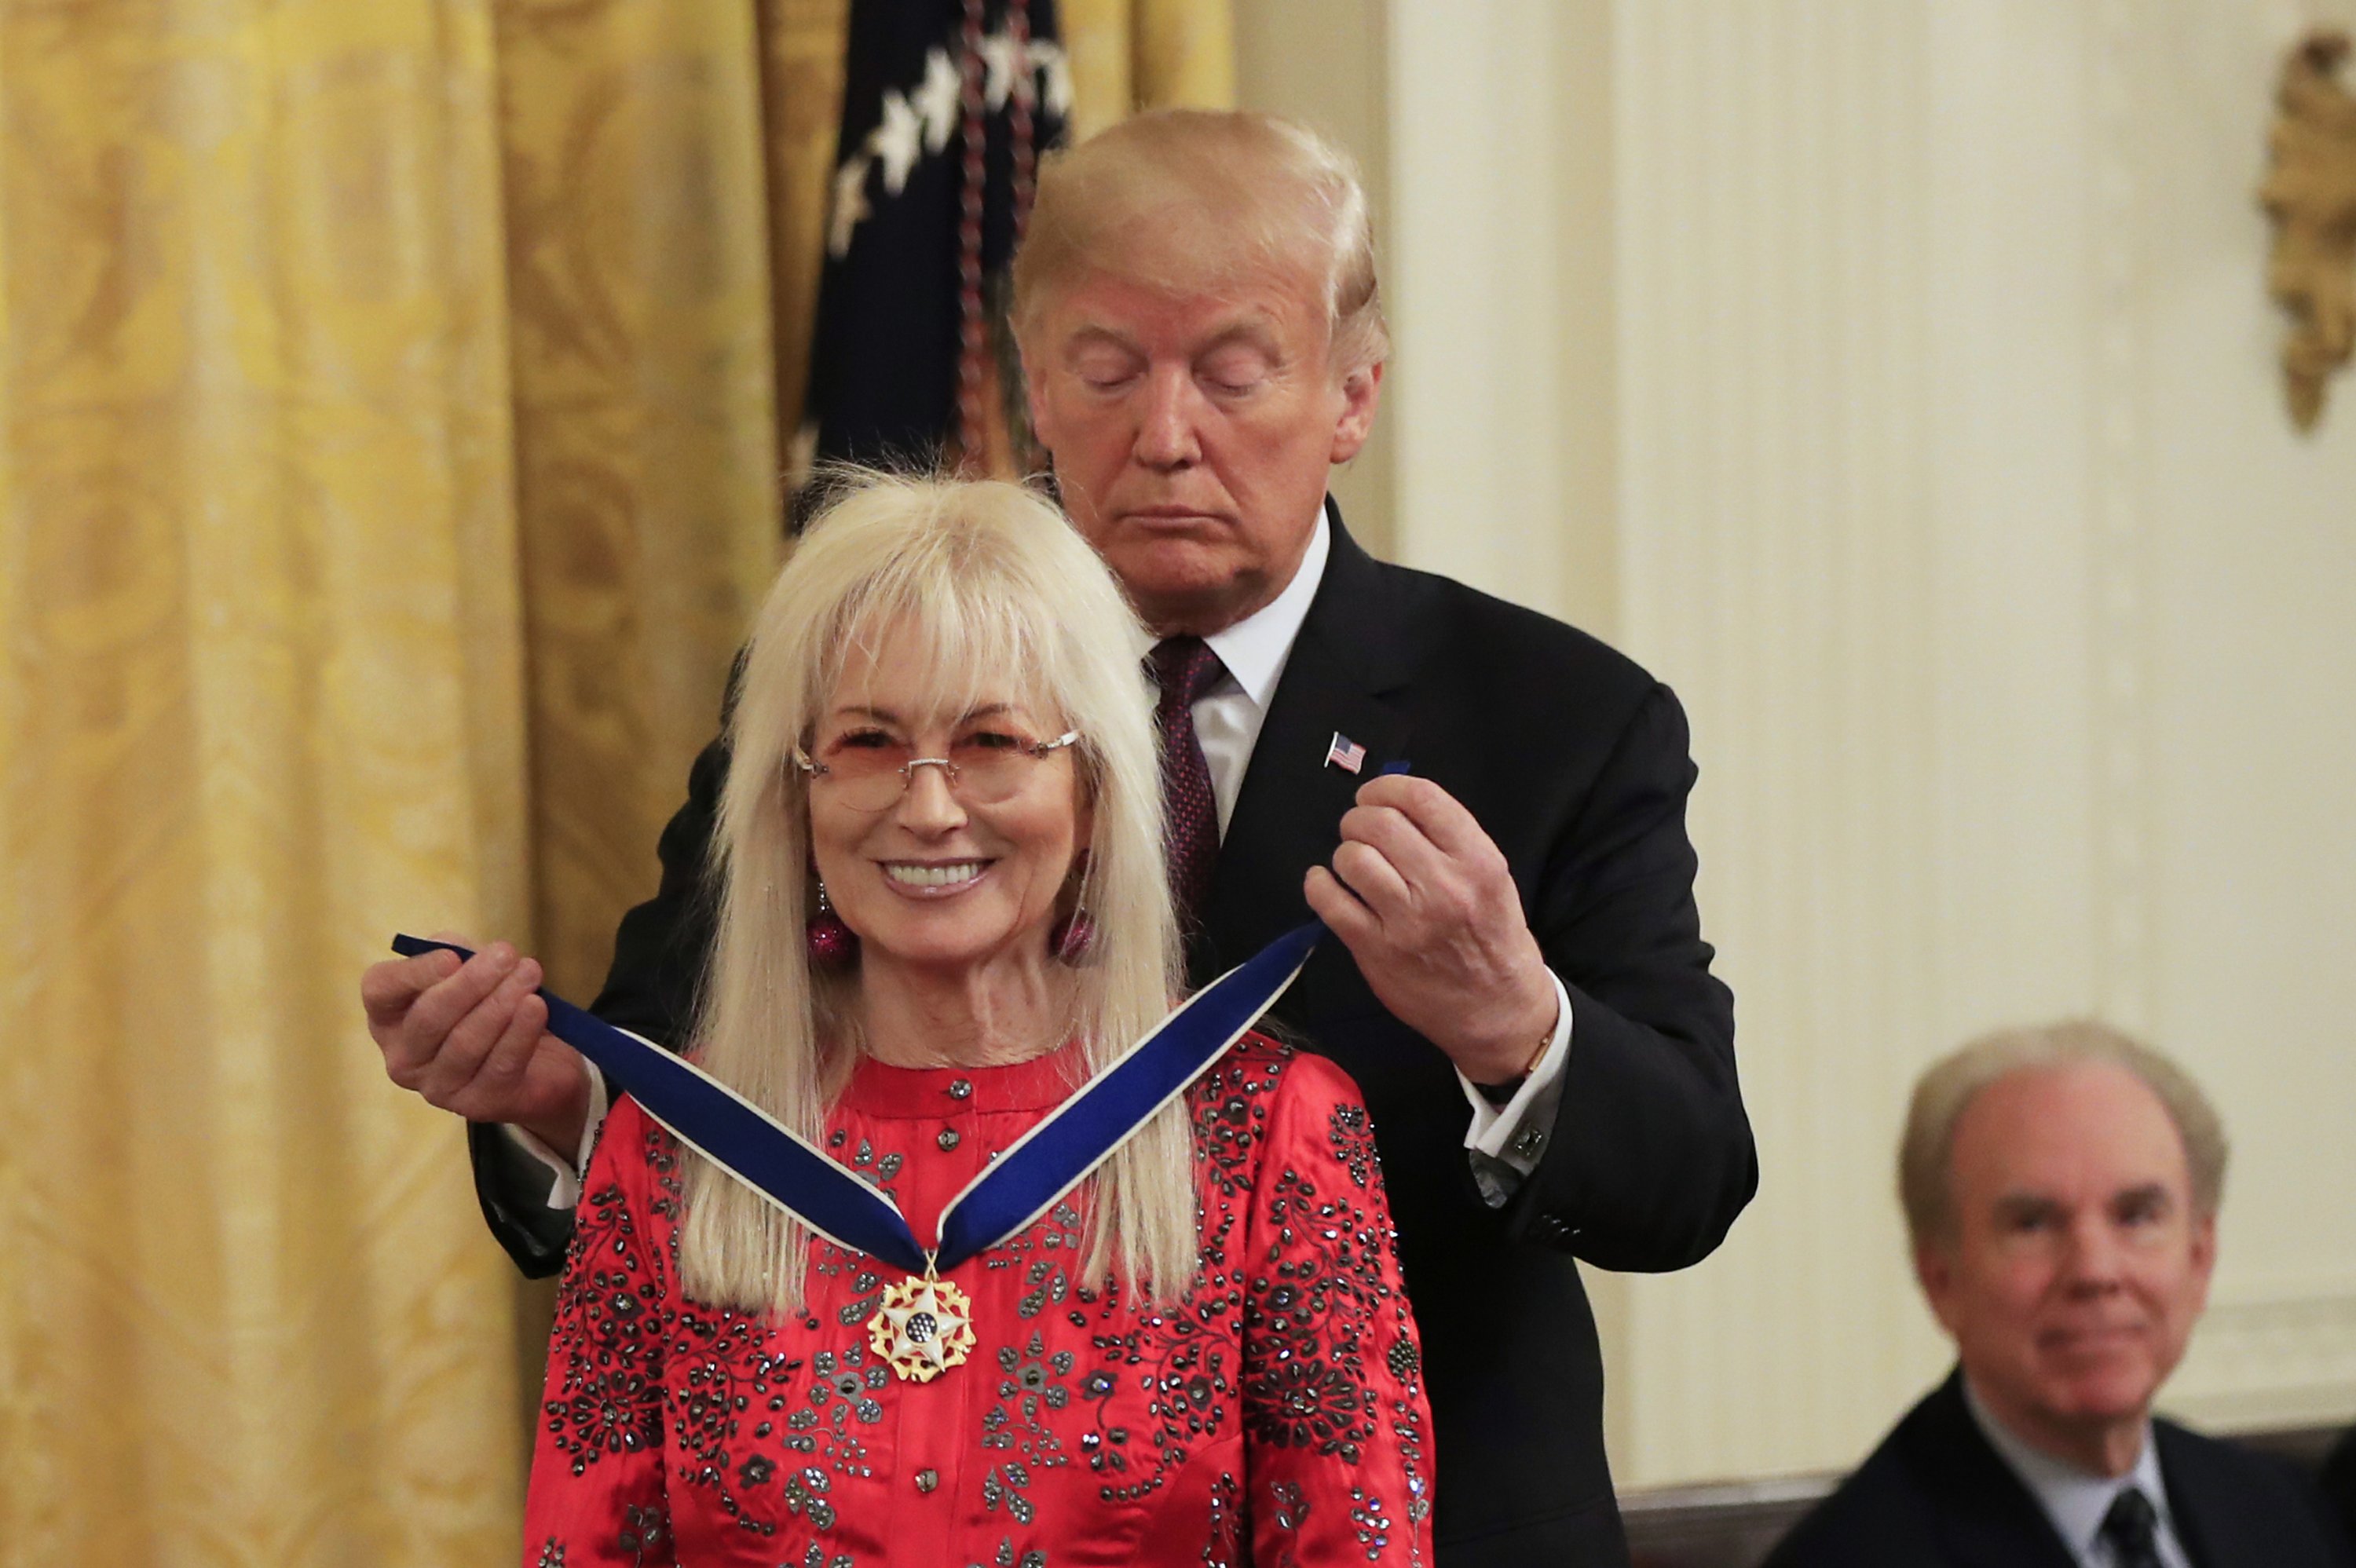 Trump honors GOP donor, 6 others with presidential award